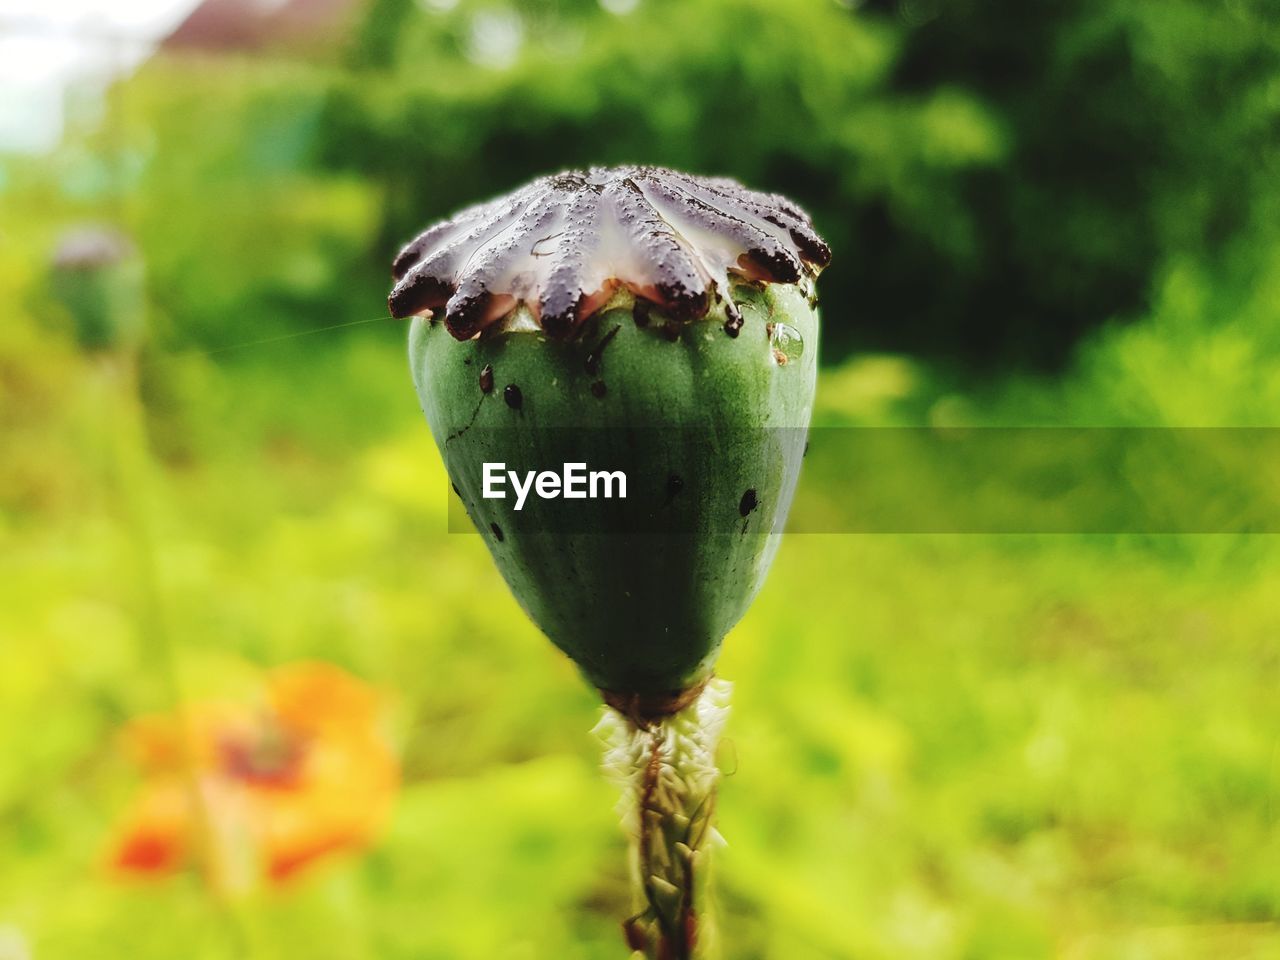 Close-up of poppy bud growing on field